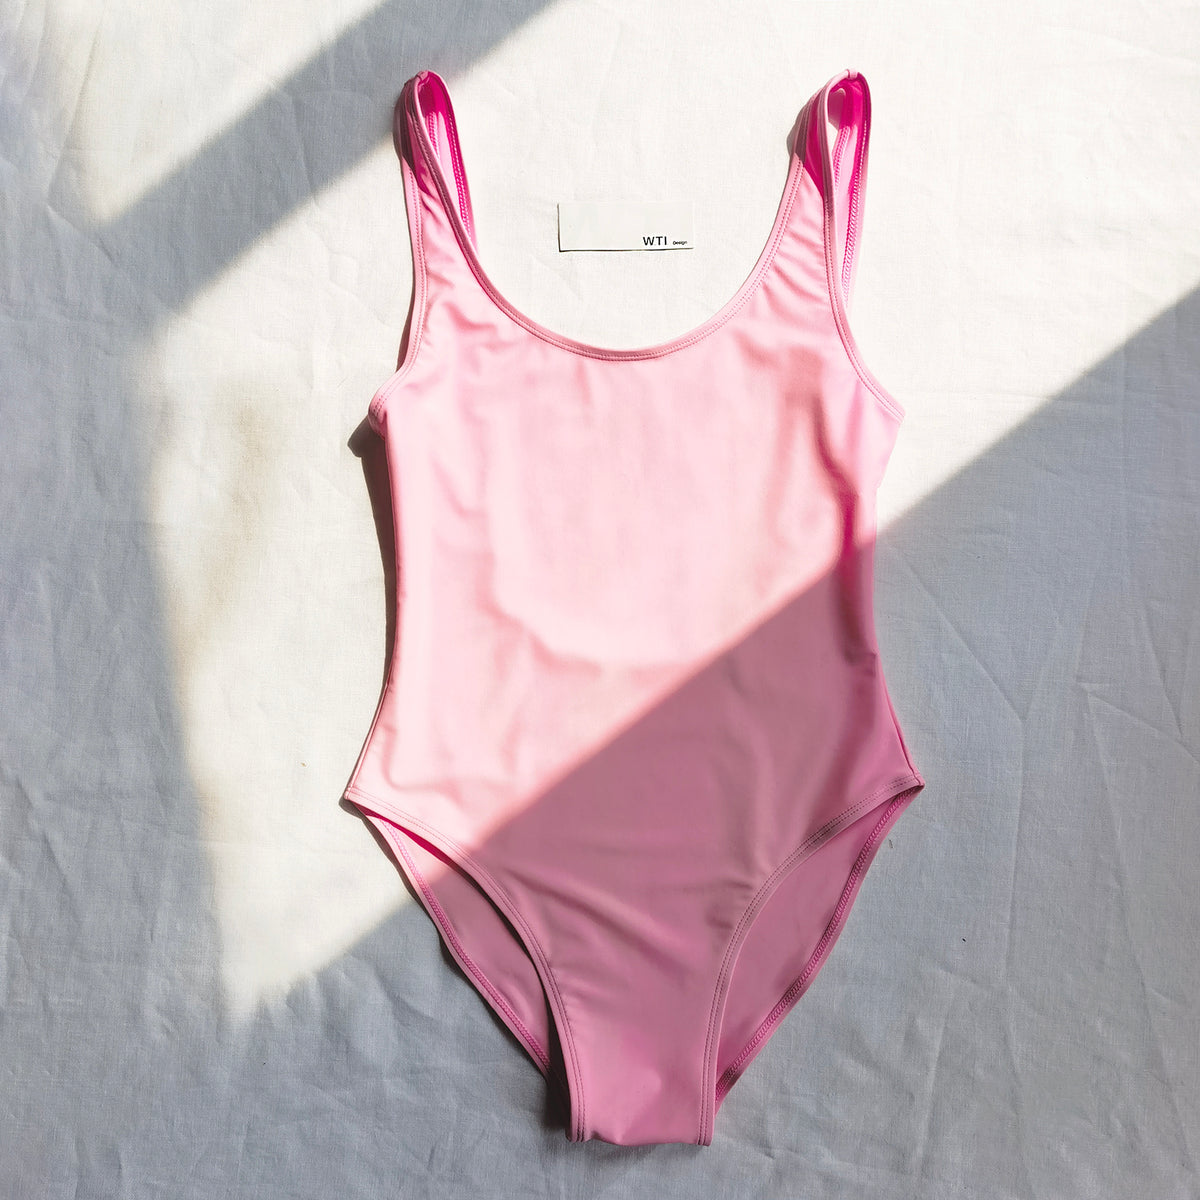 Solid Color Vintage High Cut One Piece Swimsuit